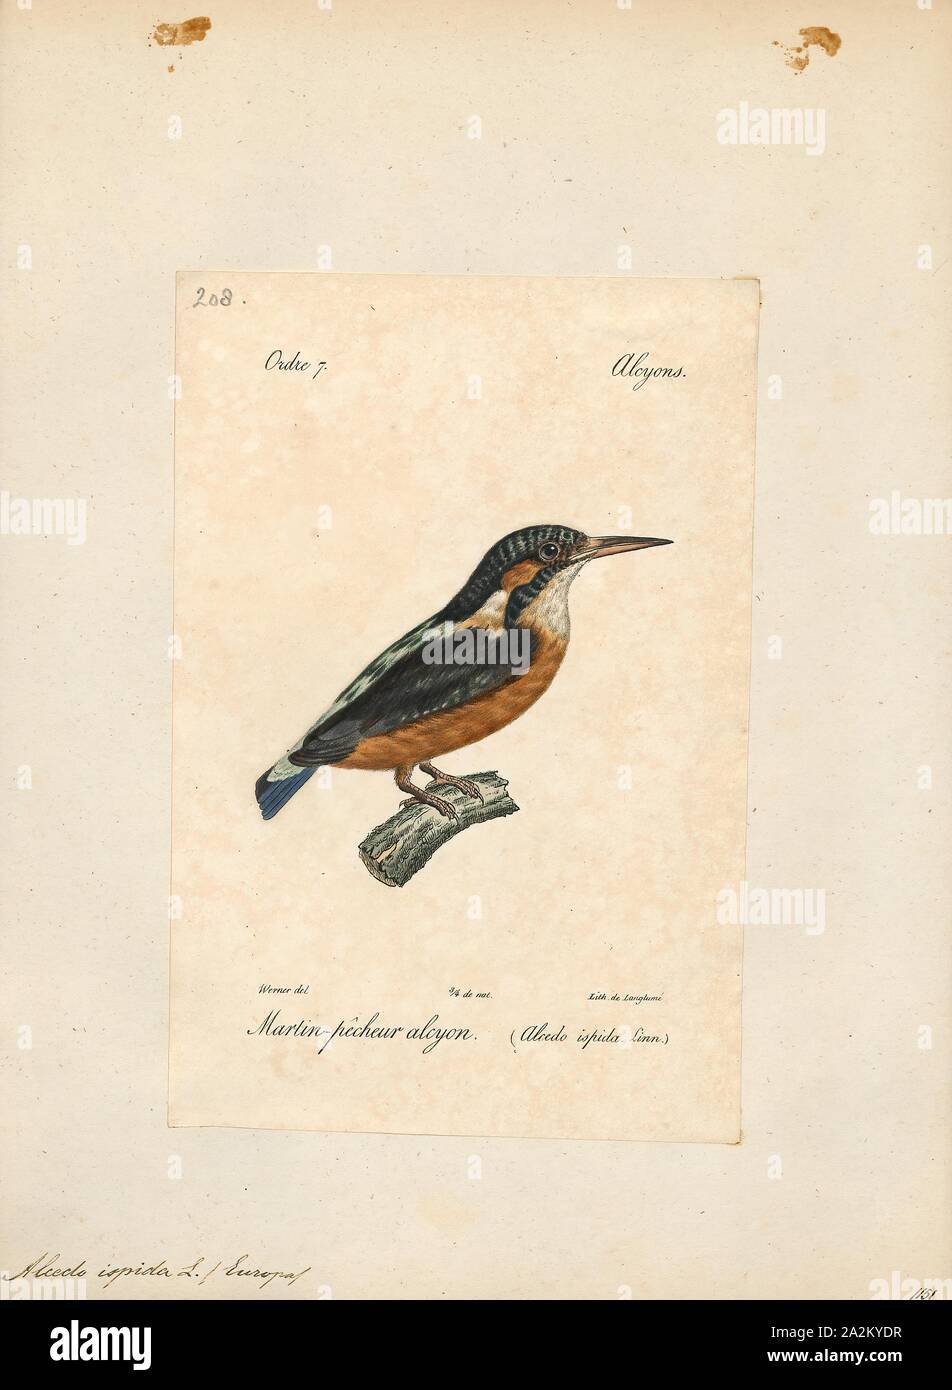 Alcedo ispida, Print, The common kingfisher (Alcedo atthis) also known as the Eurasian kingfisher, and river kingfisher, is a small kingfisher with seven subspecies recognized within its wide distribution across Eurasia and North Africa. It is resident in much of its range, but migrates from areas where rivers freeze in winter., 1842-1848 Stock Photo